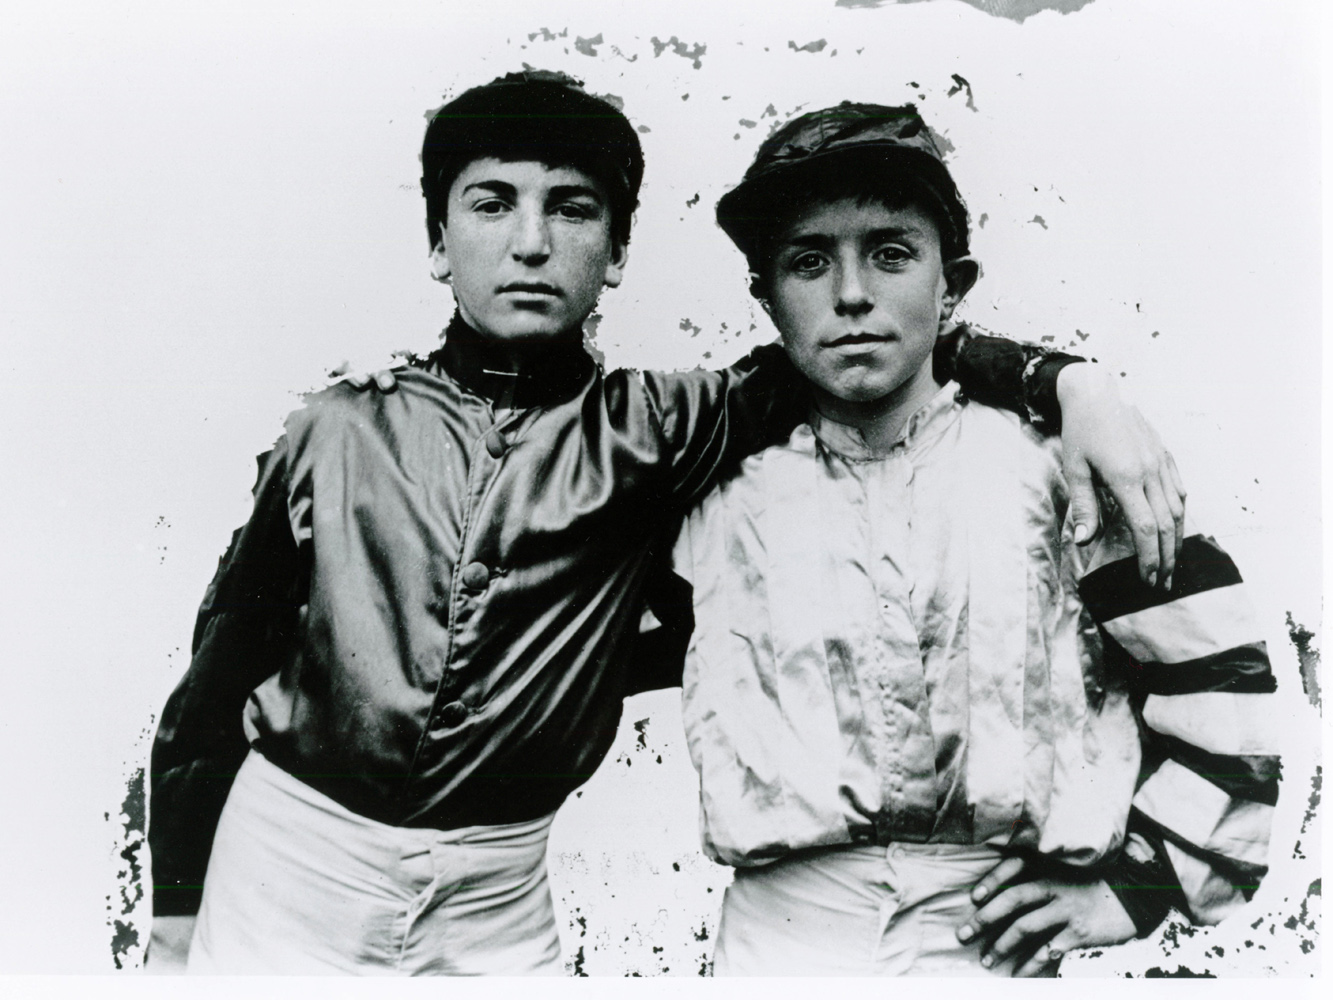 Jockeys Walter Miller and R. McDaniel in 1906 (Keeneland Library Cook Collection/Museum Collection)